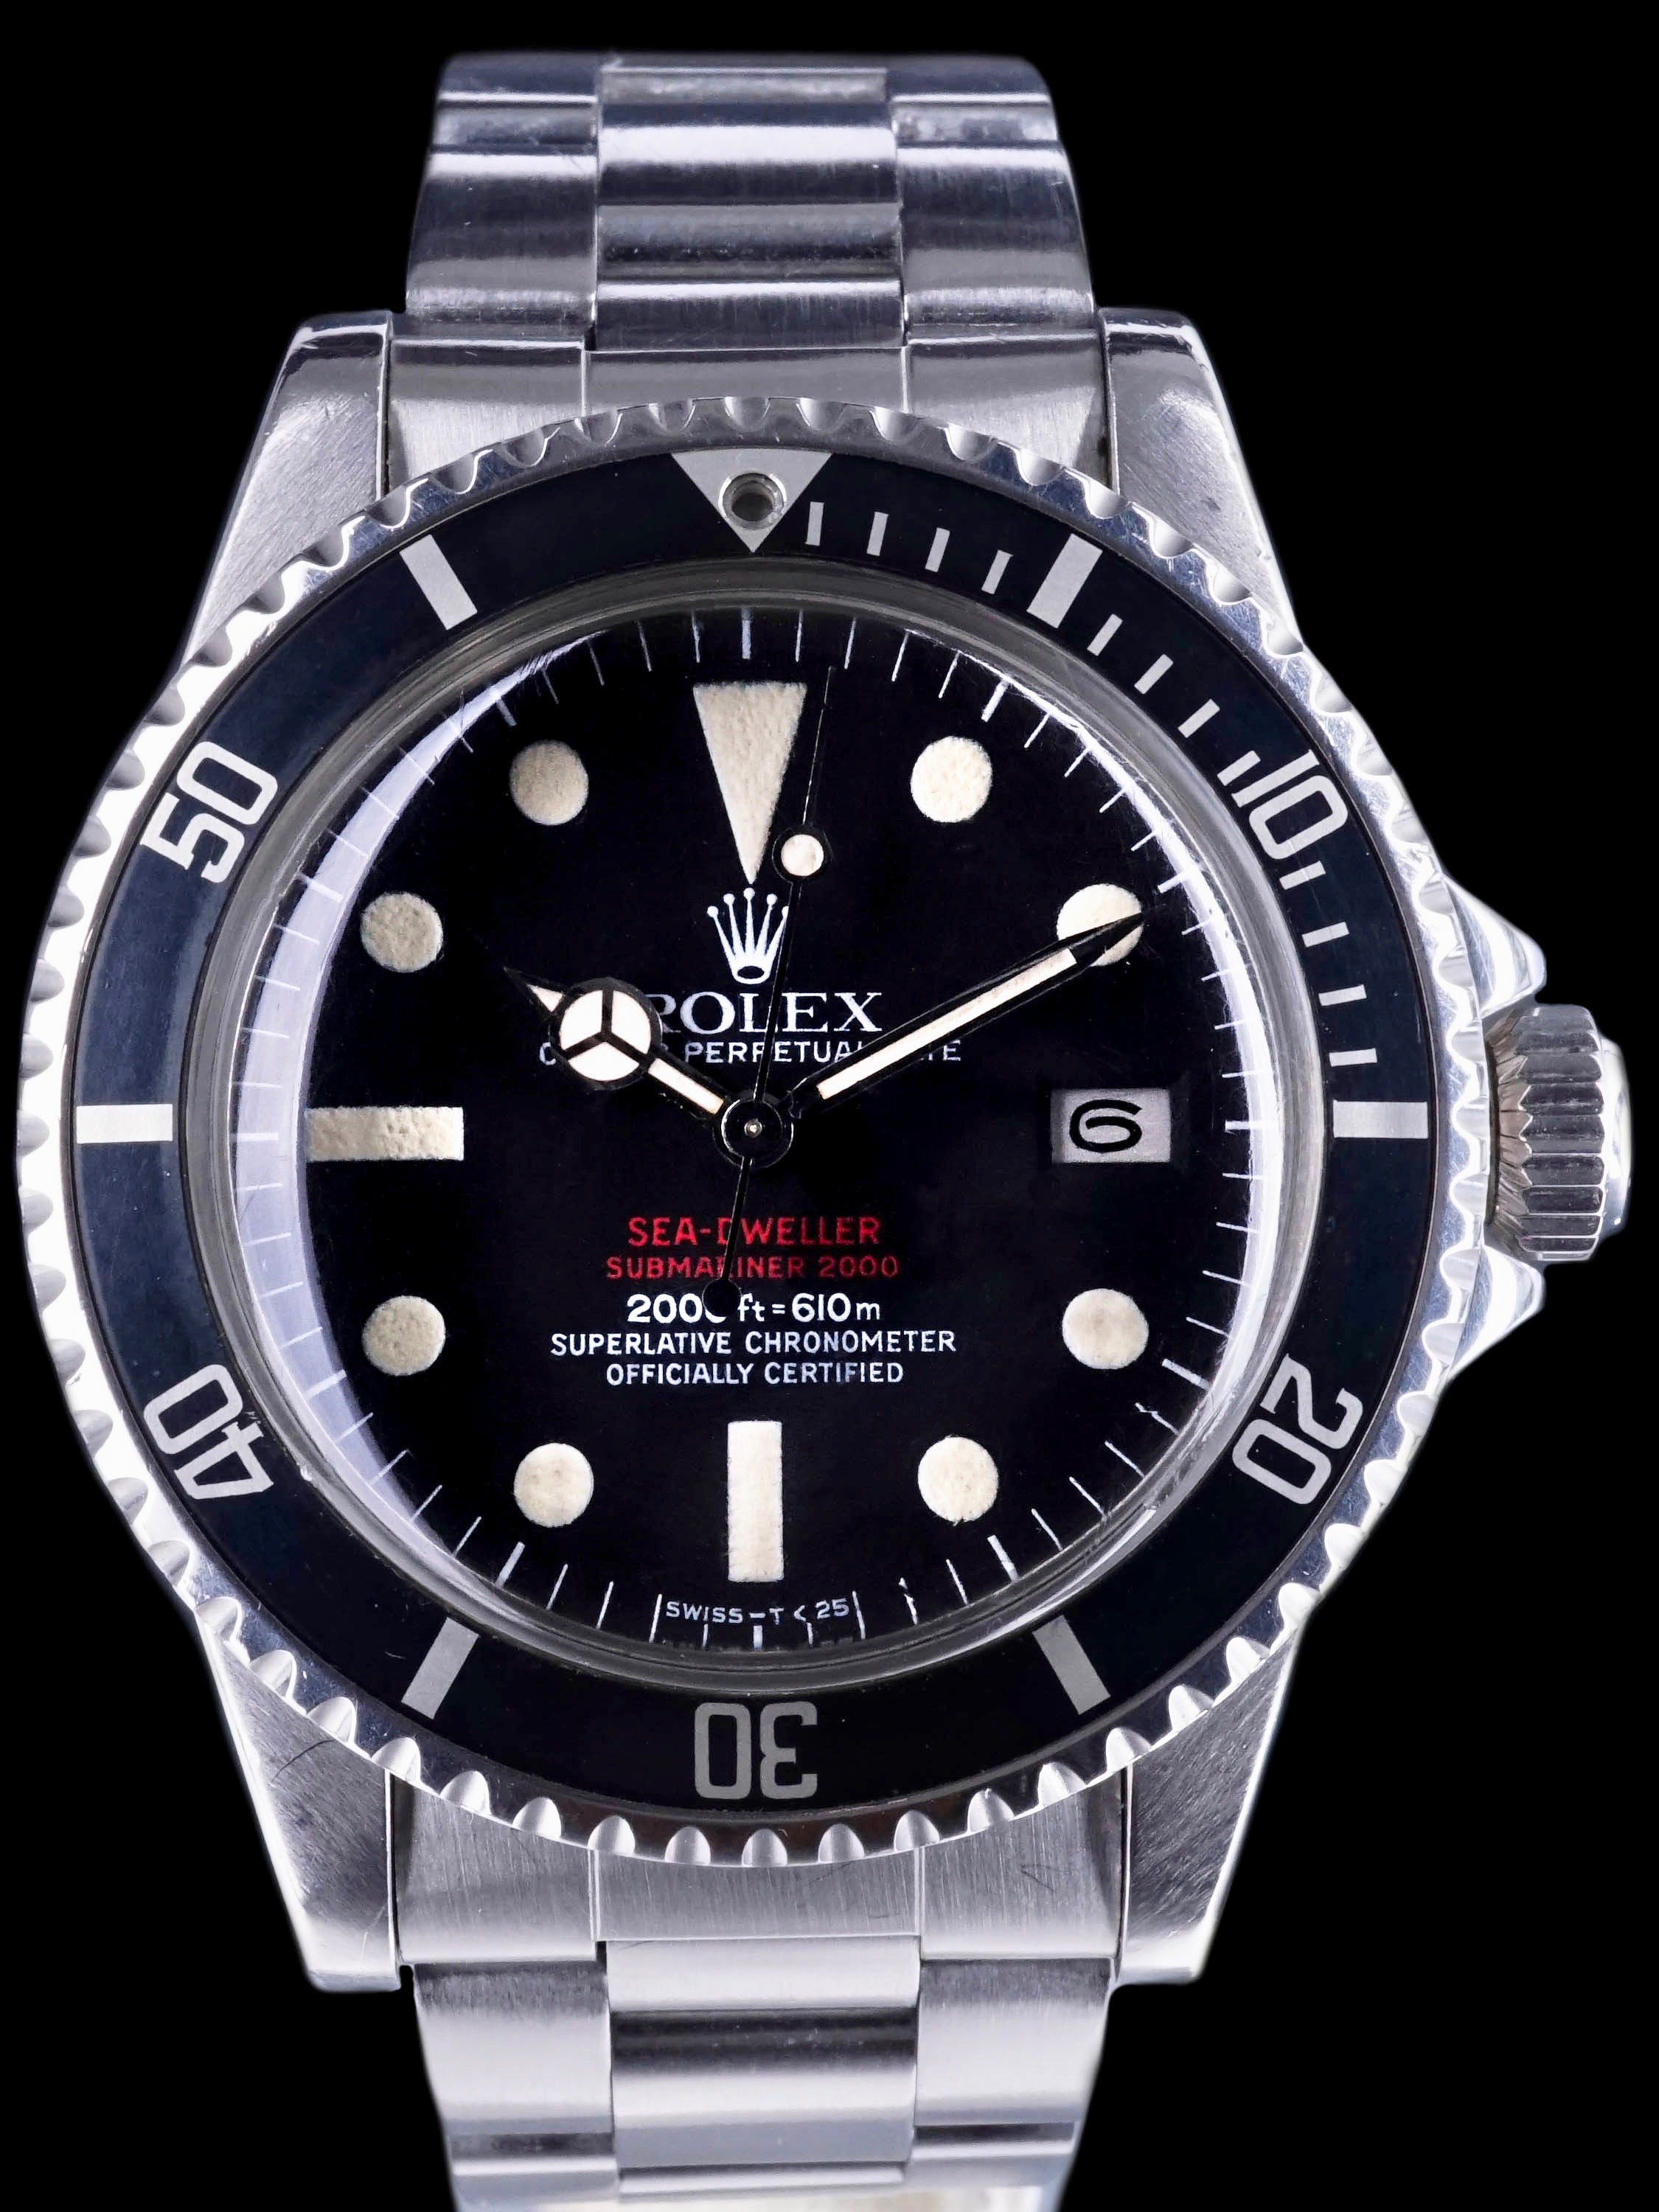 1976 Rolex Double Red Sea-Dweller (Ref. 1665) "Mk. IV" W/ Box, Papers, Sales Receipt, and Service History